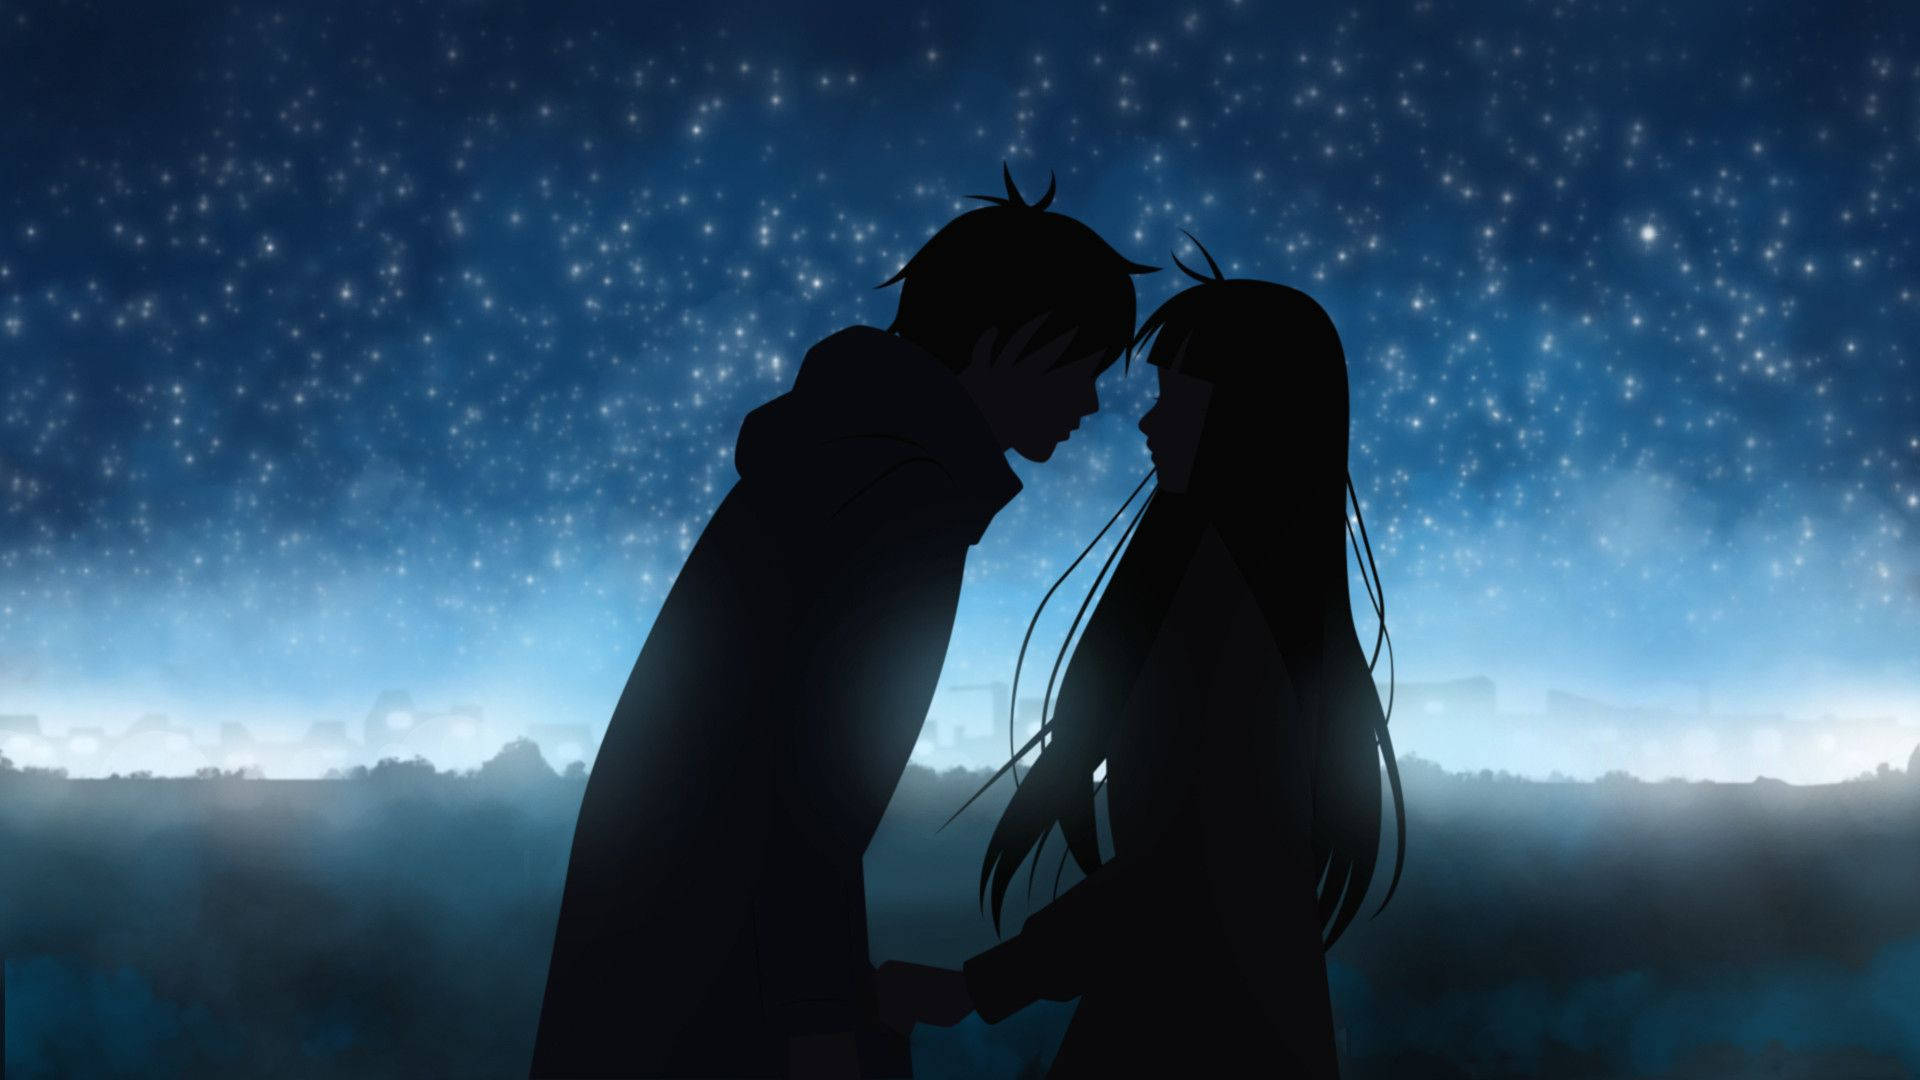 Download Couple Silhouette Anime Aesthetic Wallpaper